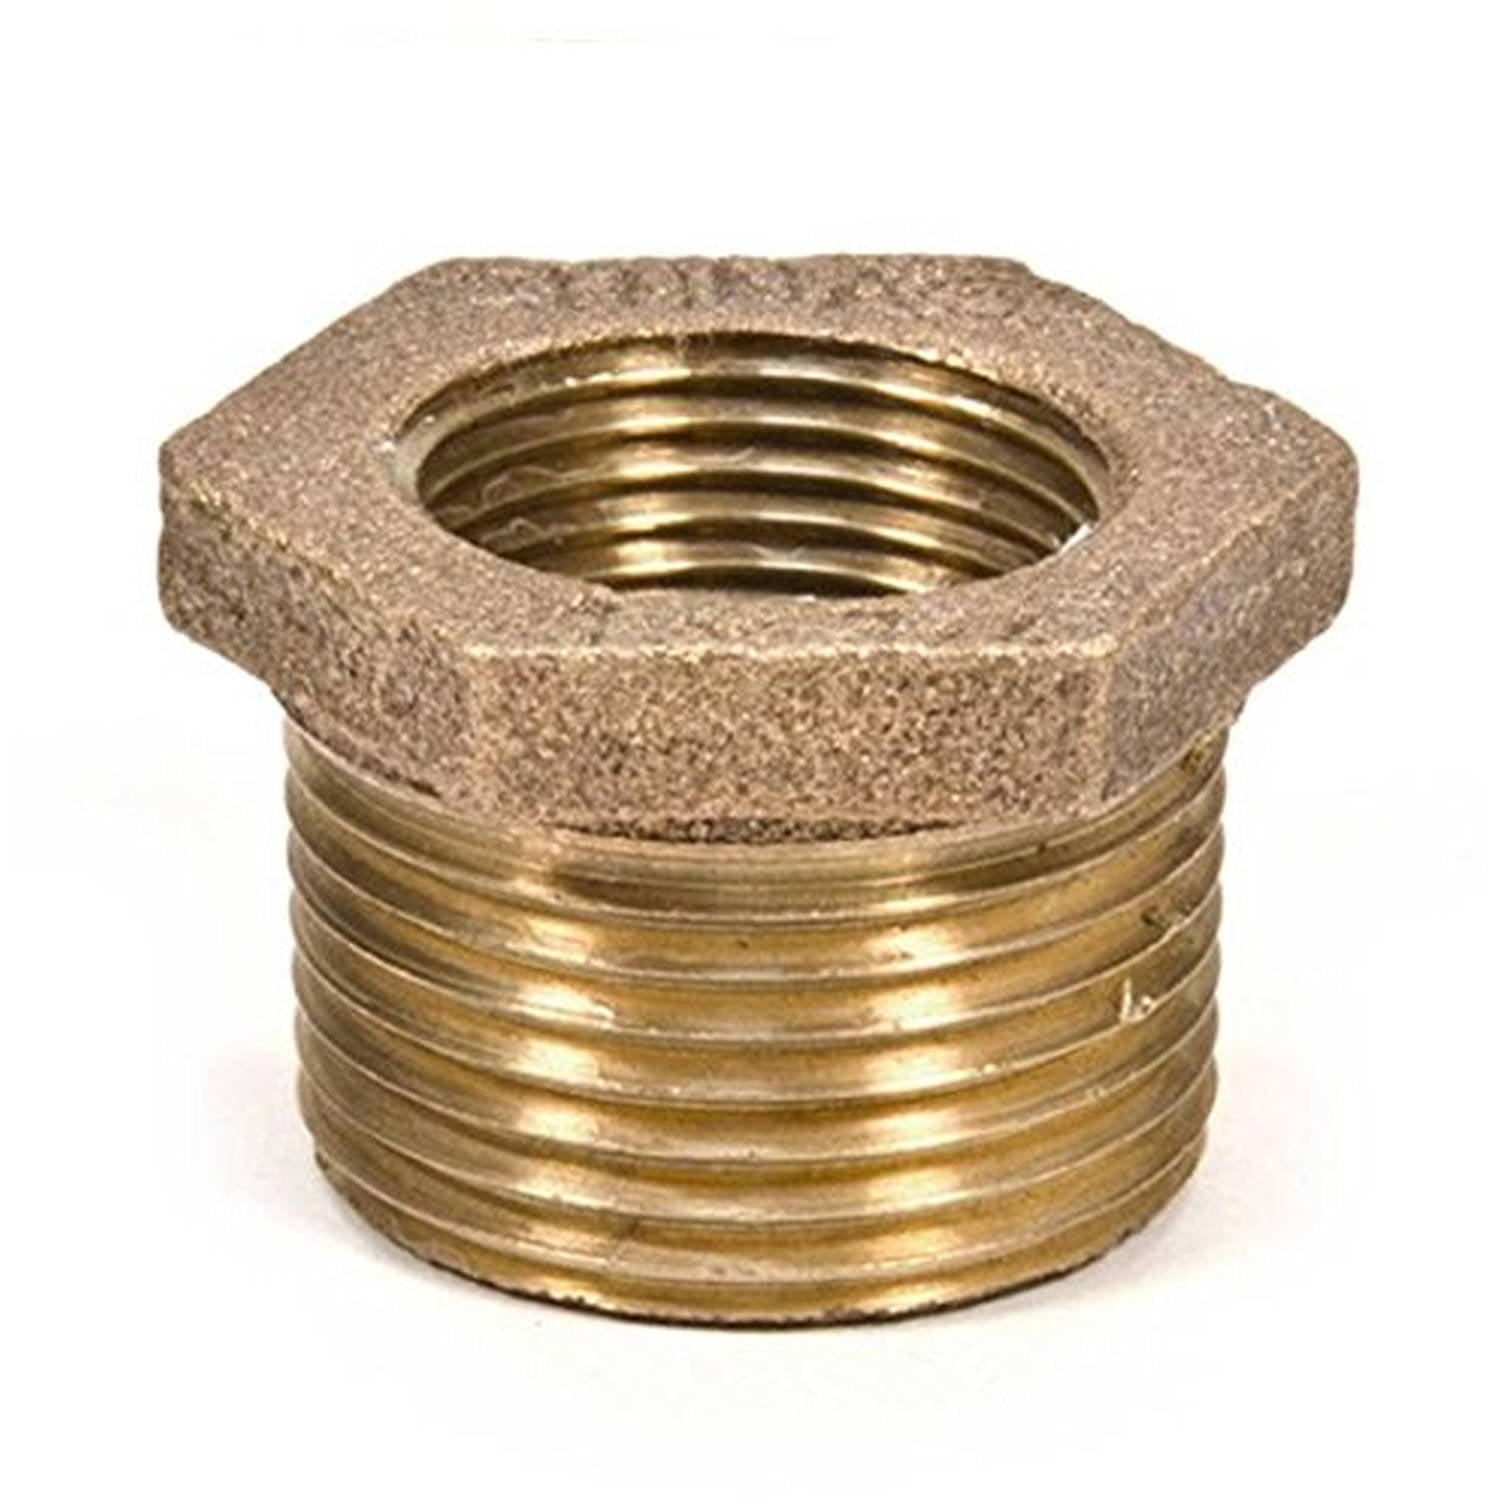 Everflow 1 x 1/2 Inch Lead Free Brass Reducing Coupling With Female Threaded 